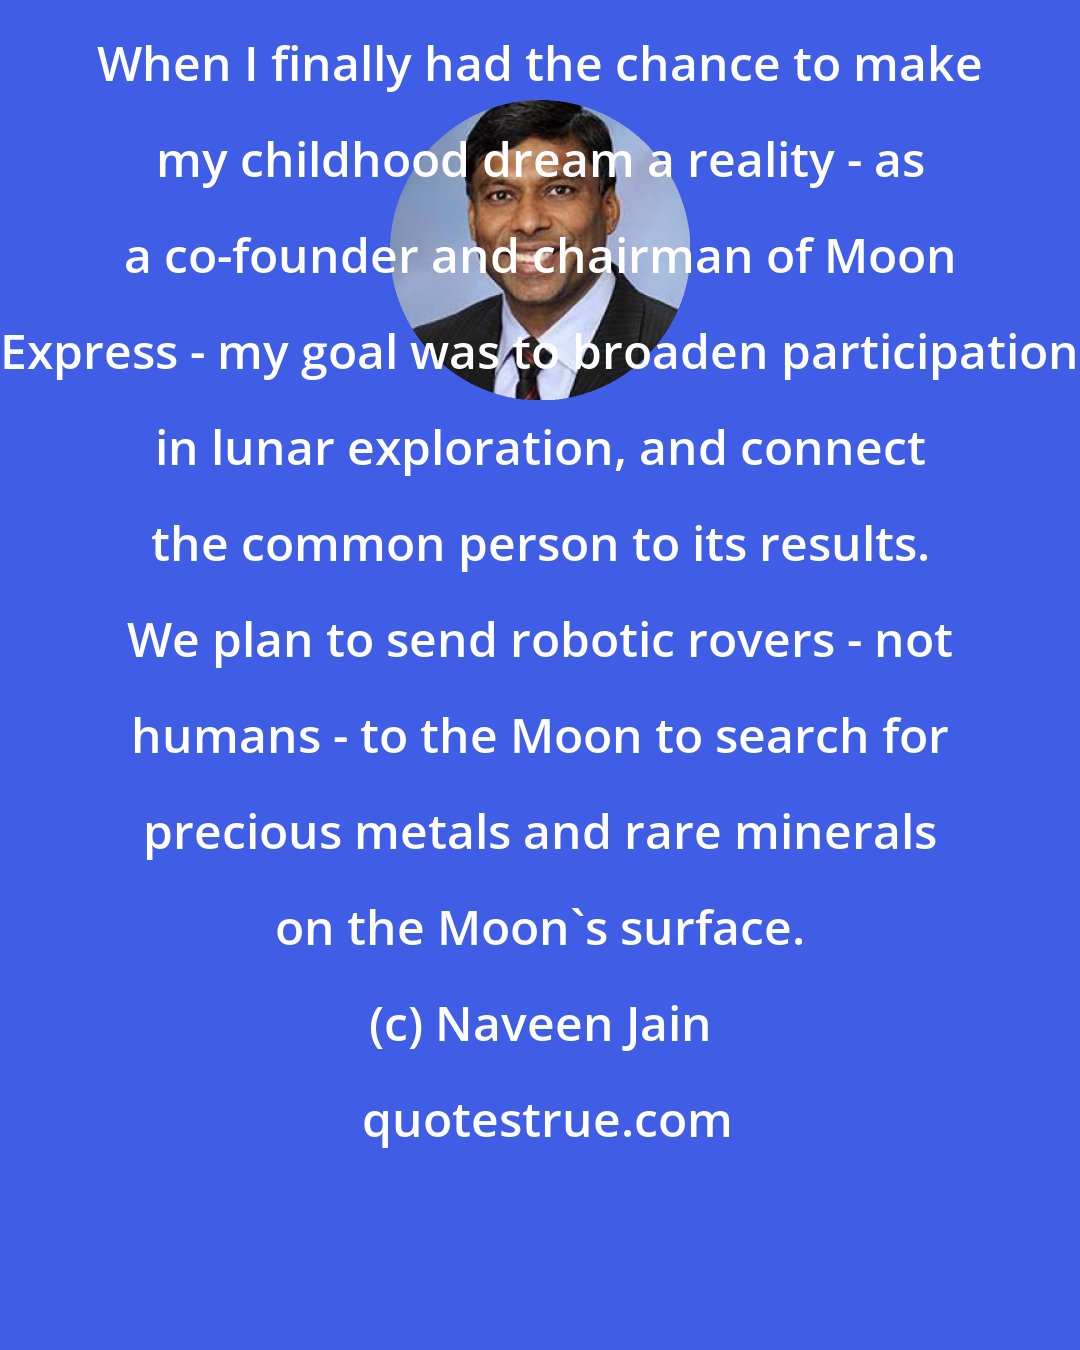 Naveen Jain: When I finally had the chance to make my childhood dream a reality - as a co-founder and chairman of Moon Express - my goal was to broaden participation in lunar exploration, and connect the common person to its results. We plan to send robotic rovers - not humans - to the Moon to search for precious metals and rare minerals on the Moon's surface.